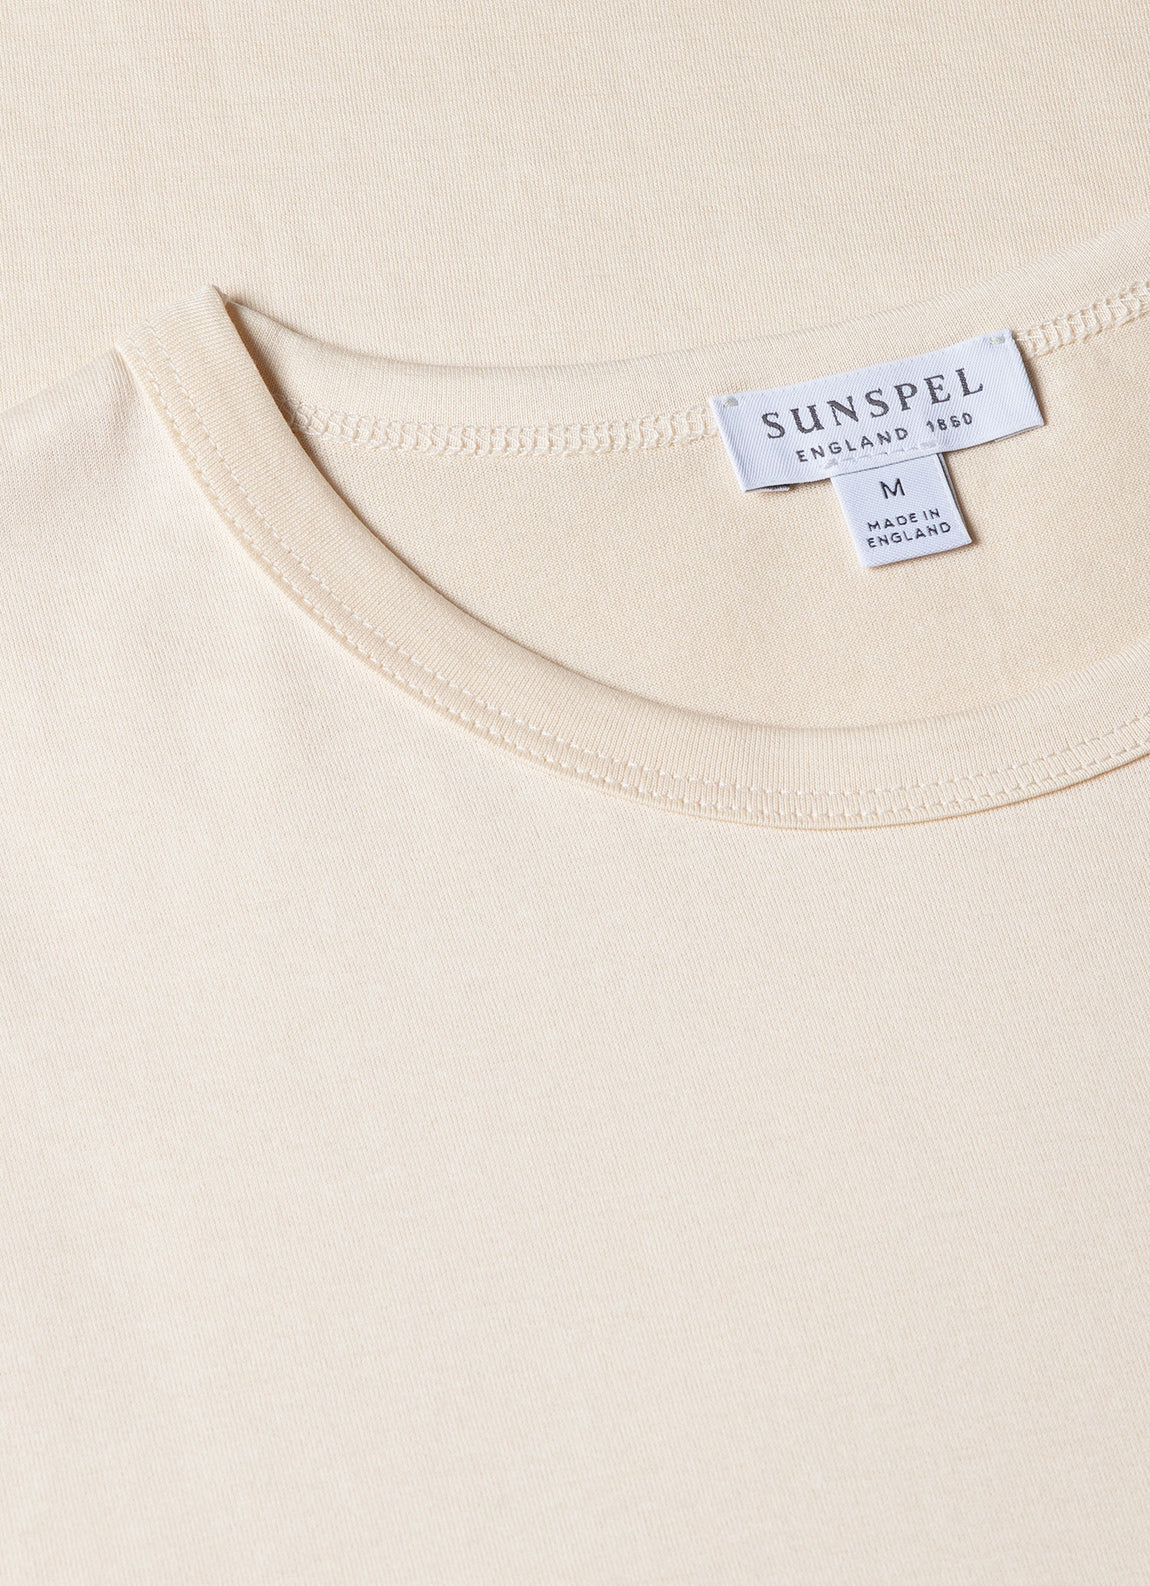 Men's Classic T-shirt in Undyed